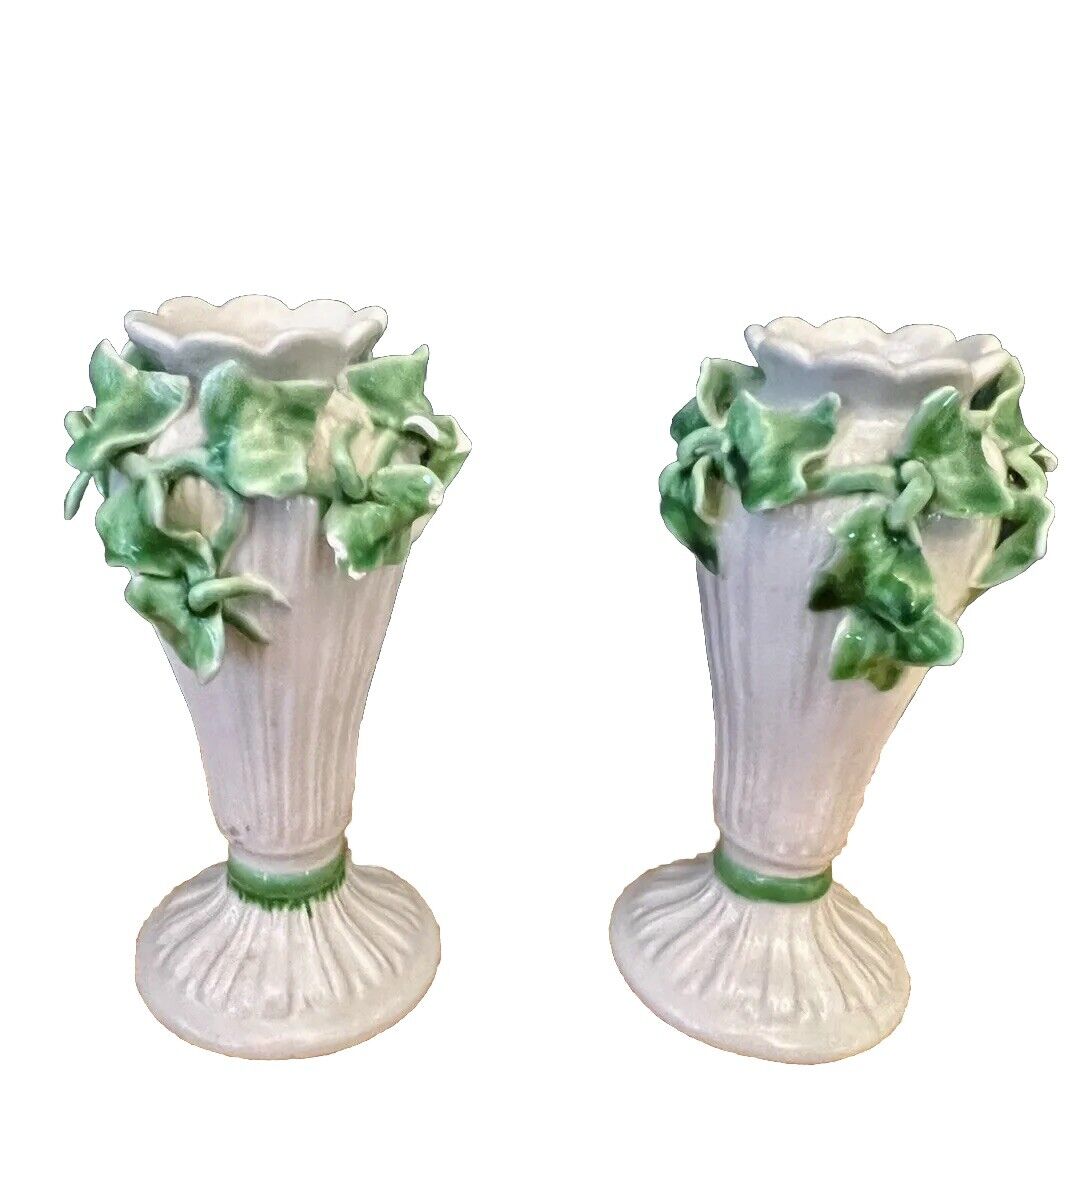 Antique Vintage Meiselman Italian White & Green Ivy candle holders Cottagecore